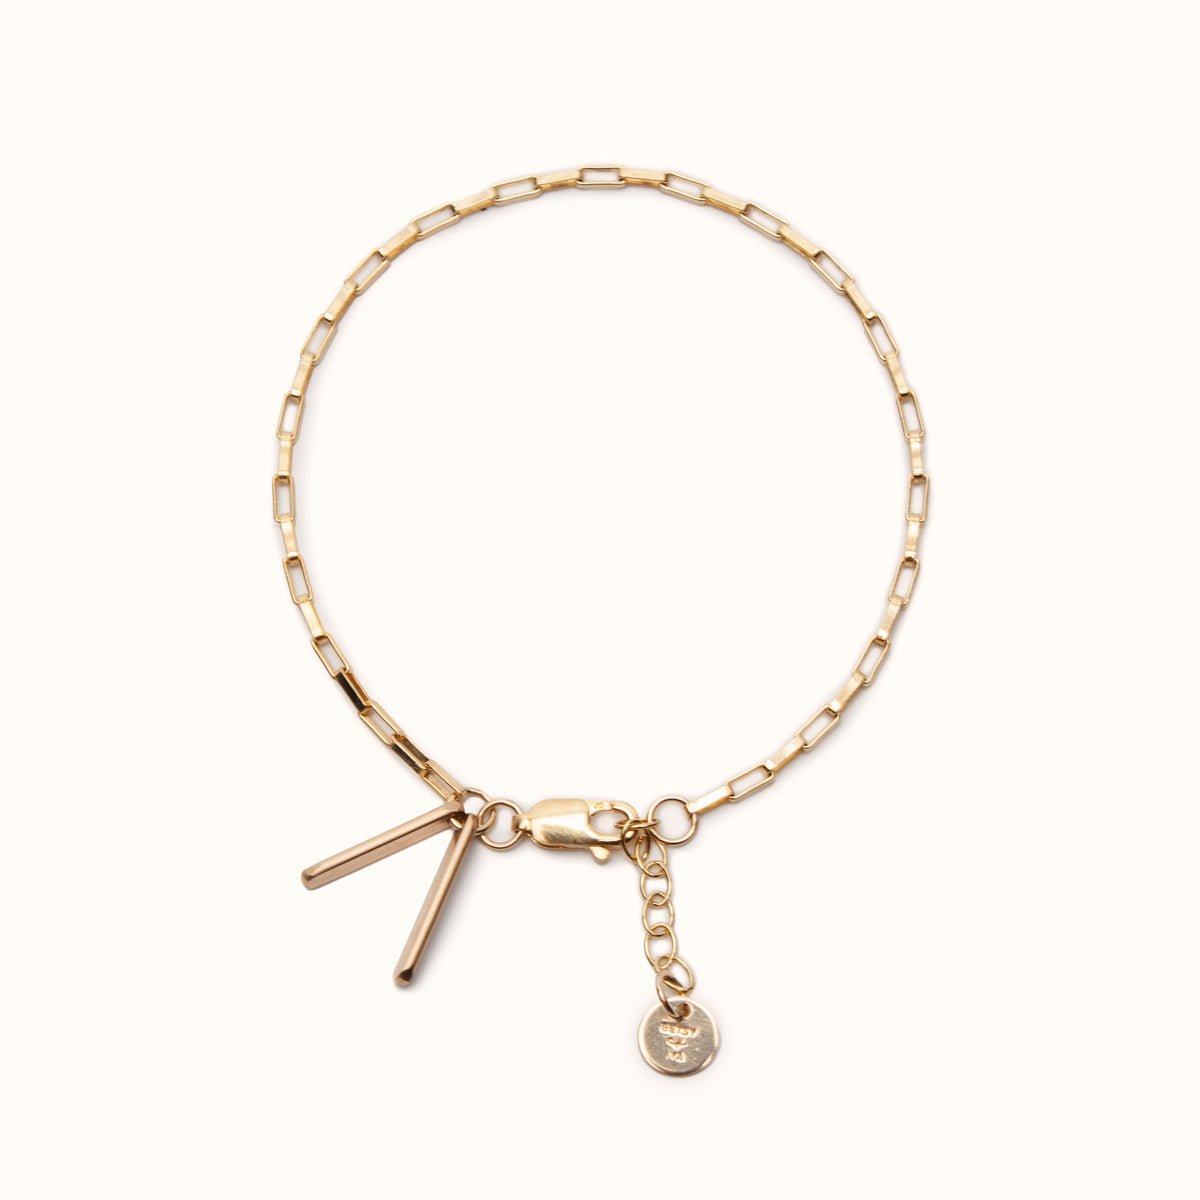 A delicate gold fill chain link bracelet with two petite rectangular tags, lobster clasp and  jump rings to allow for adjustability. The Alba Bracelet is designed and handcrafted in Portland, Oregon.